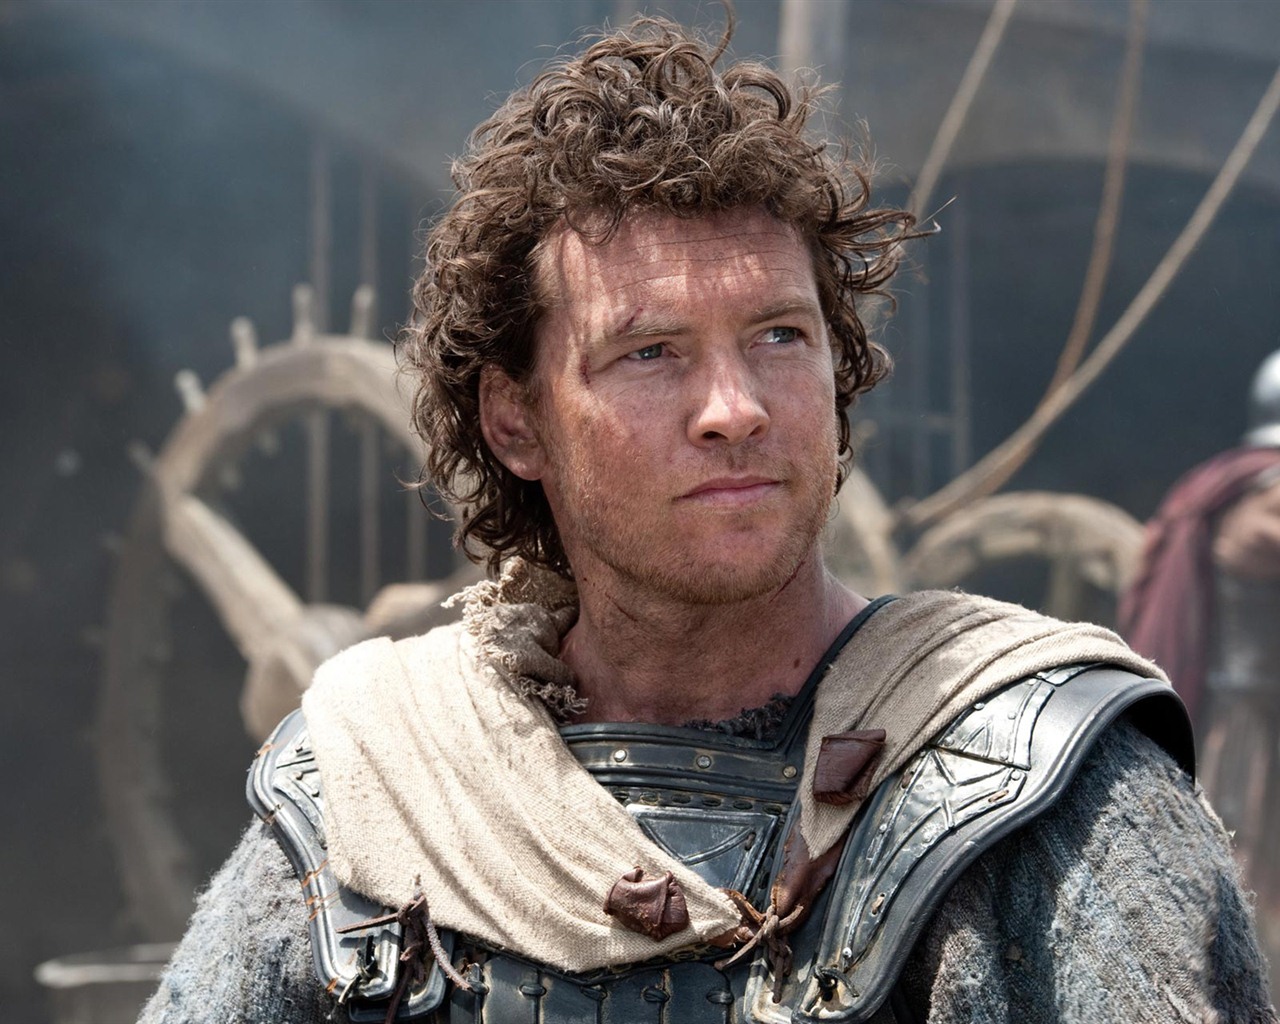 Wrath of the Titans HD Wallpapers #5 - 1280x1024